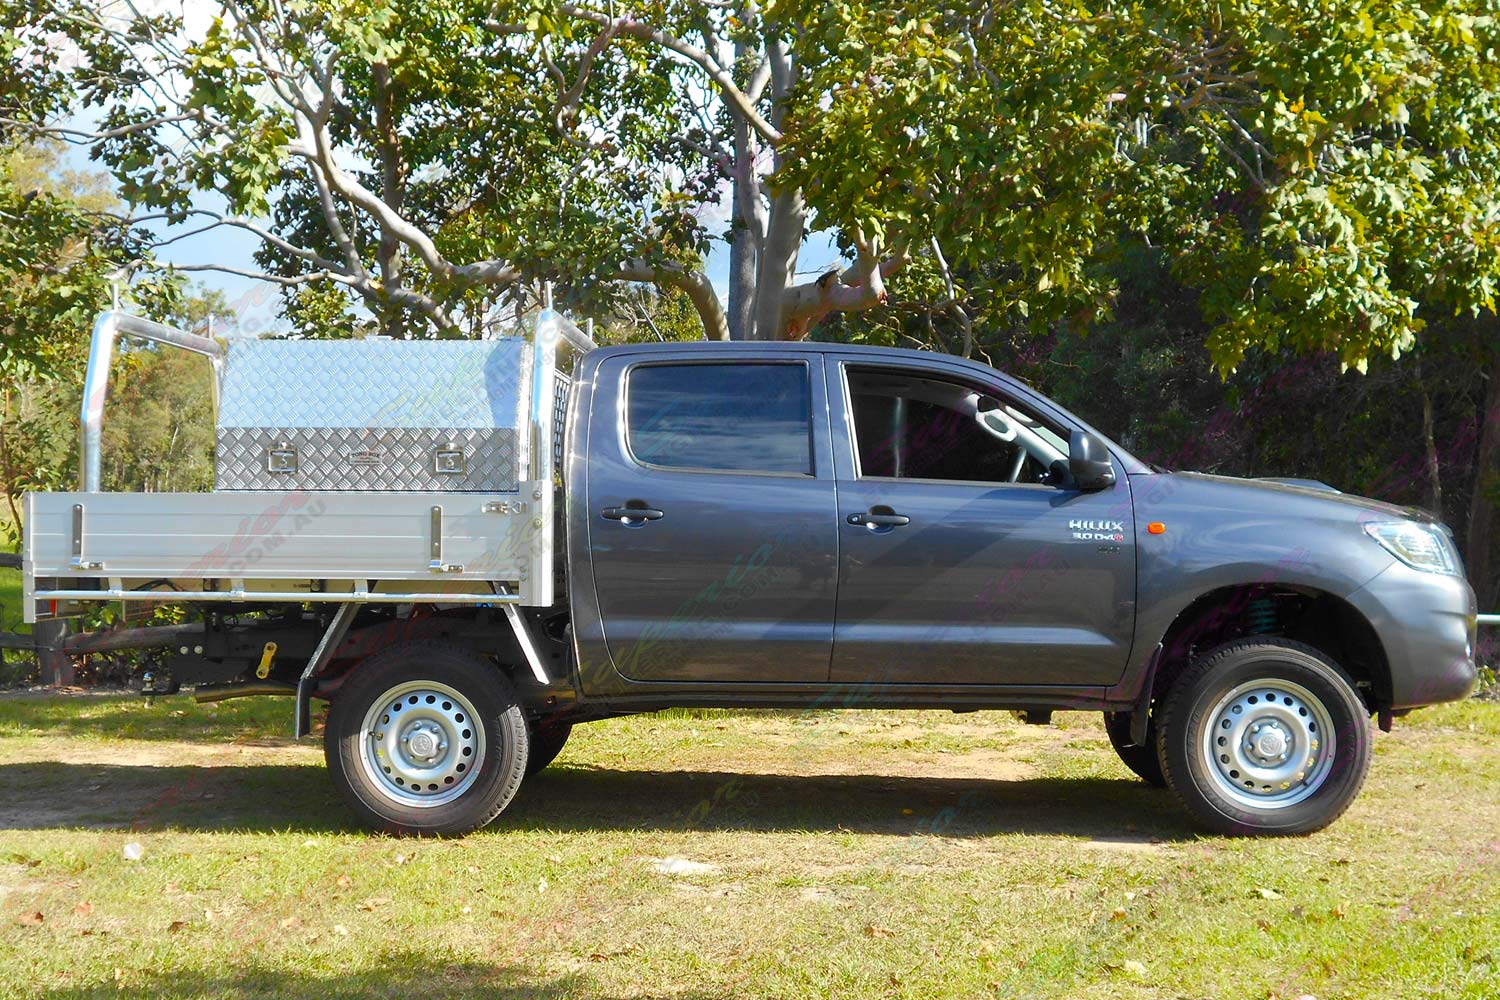 Right side view of a grey dual cab Toyota Hilux (Vigo) fitted with a heavy duty Dobinson 2 inch lift kit